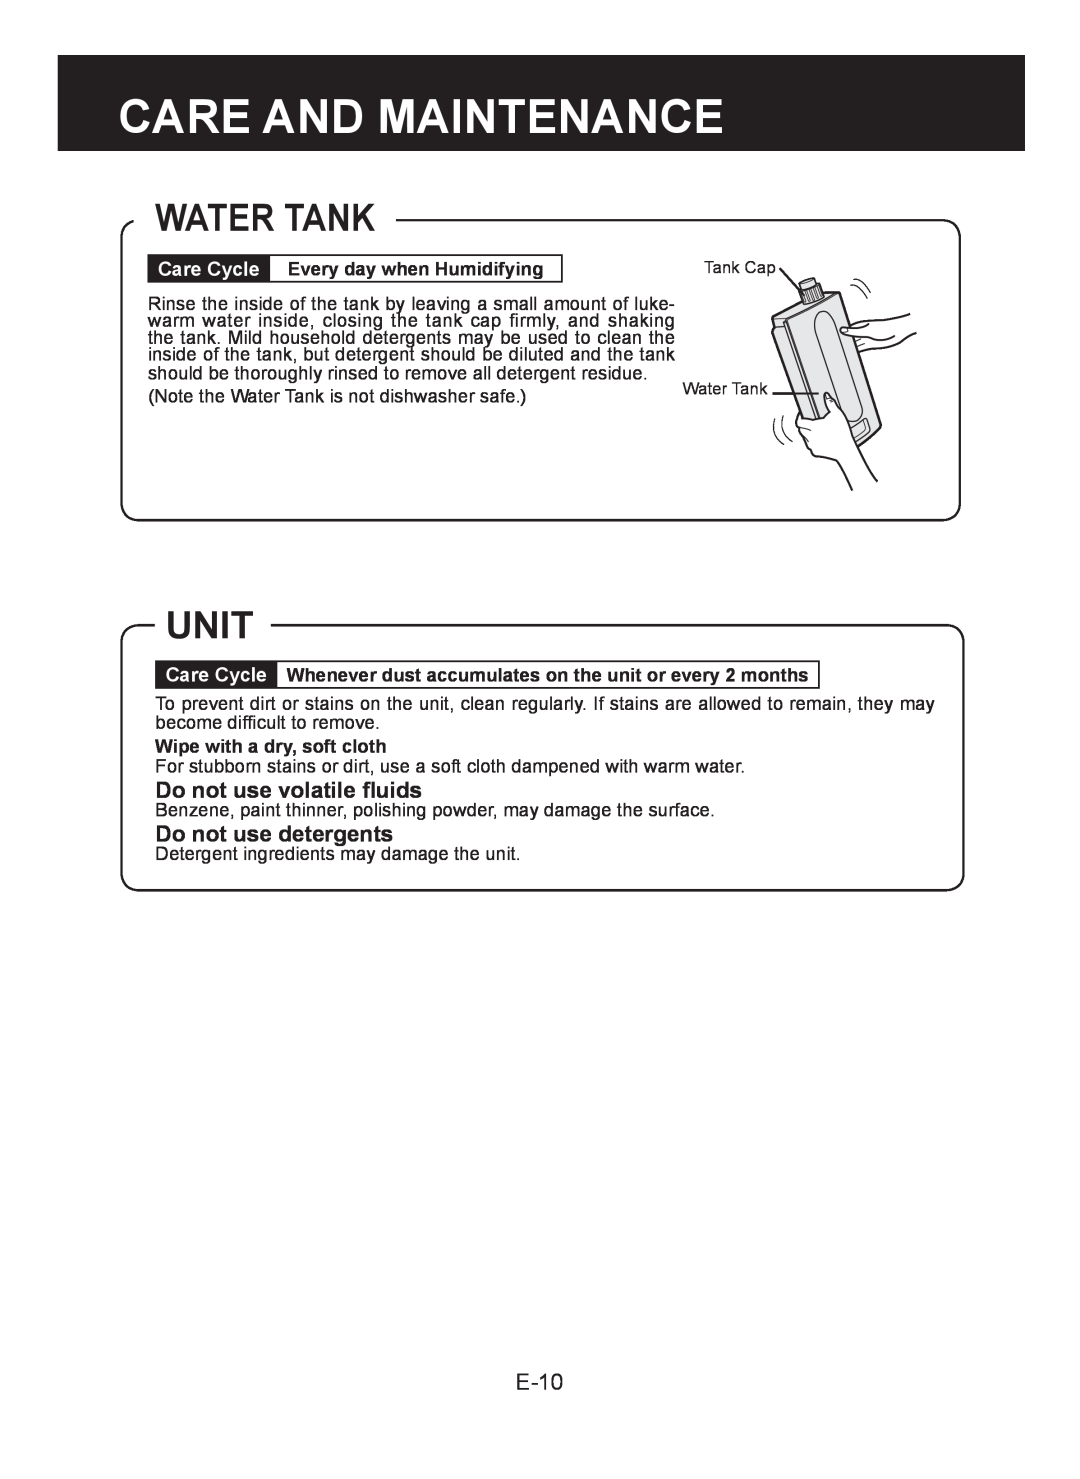 Sharp KC-930E Water Tank, Unit, Do not use volatile ﬂuids, Do not use detergents, E-10, Care And Maintenance, Care Cycle 